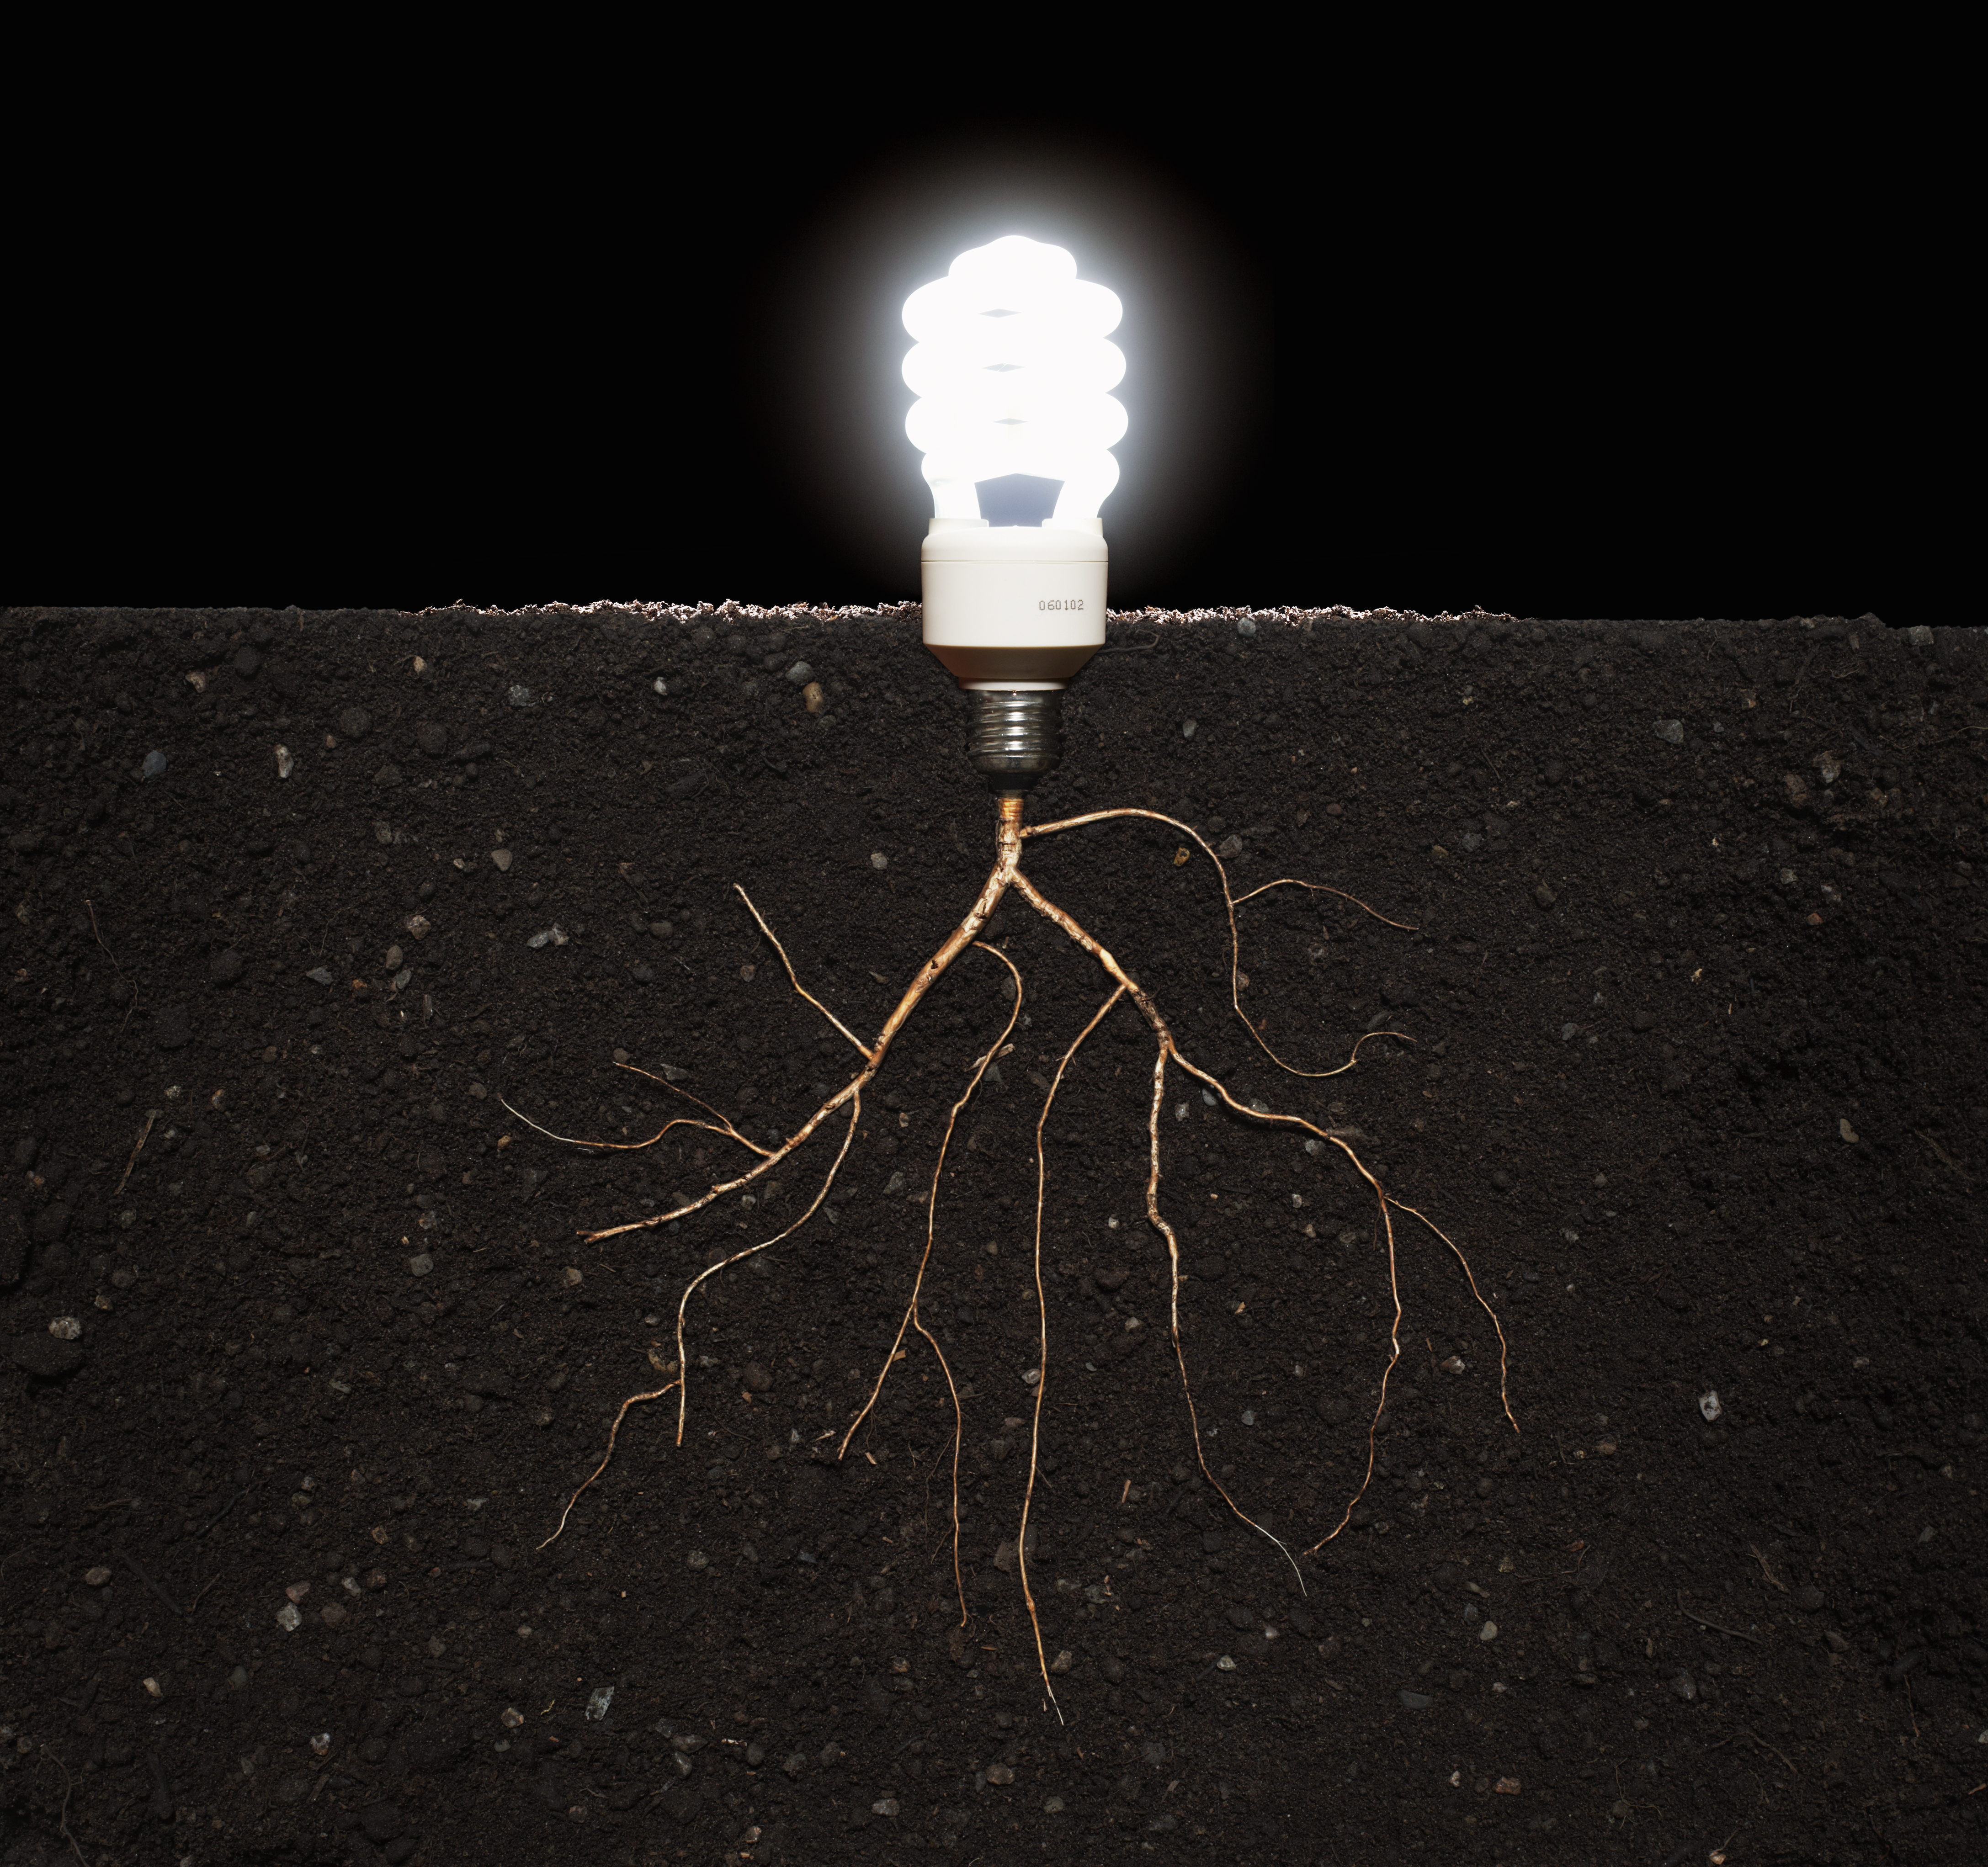 Energy efficient lightbulb growing from plant roots in soil, close-up